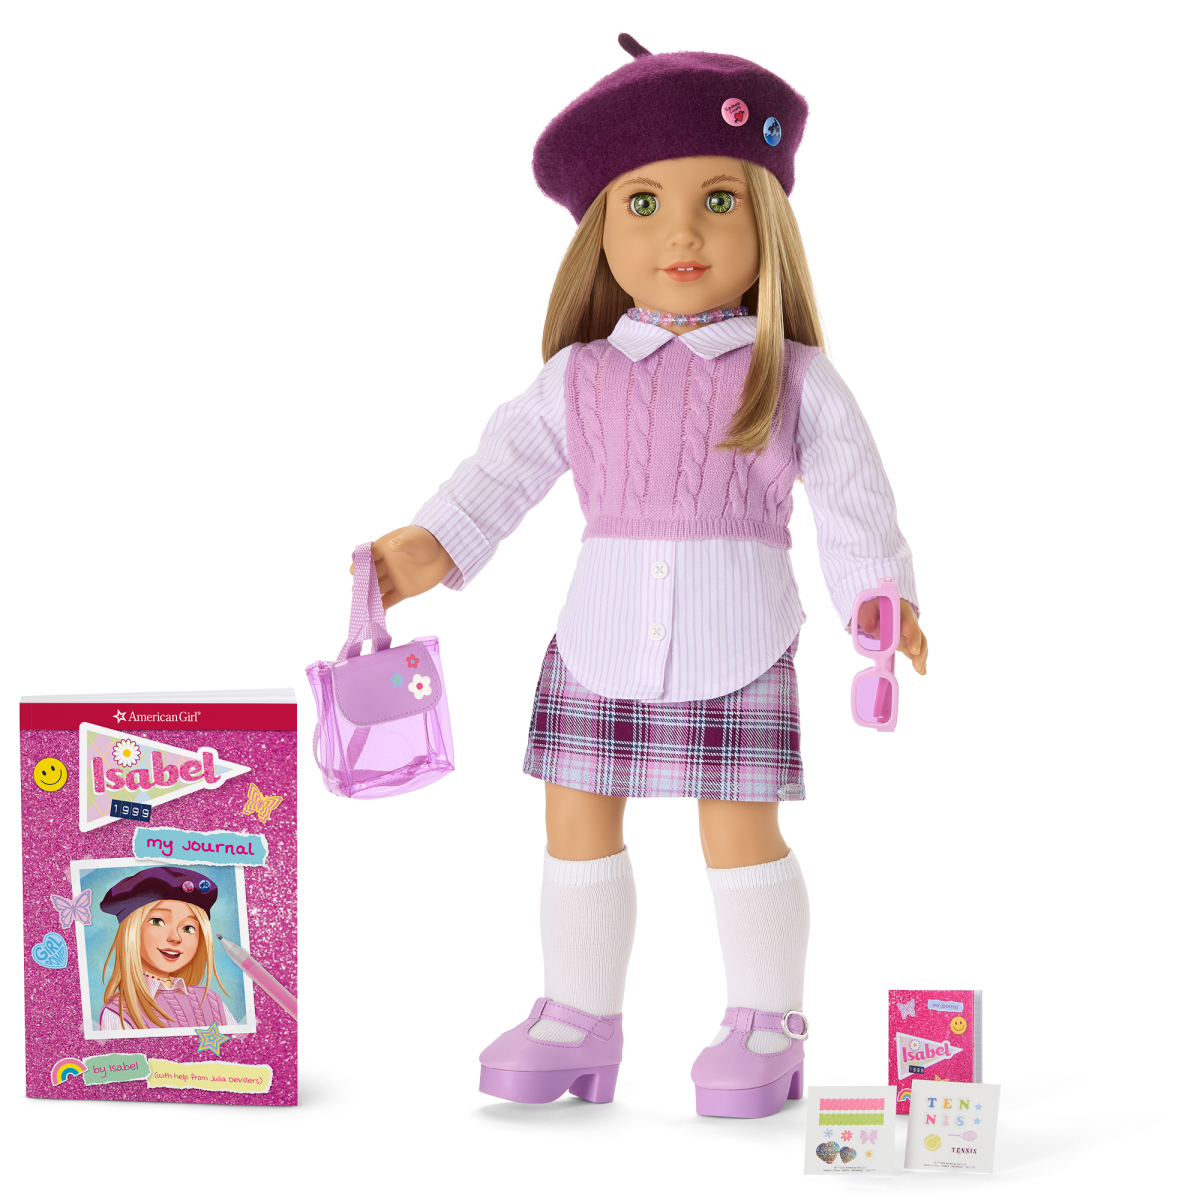 All About Isabel And Nicki Hoffman The New 1990s Historical American Girl Dolls Hobbylark